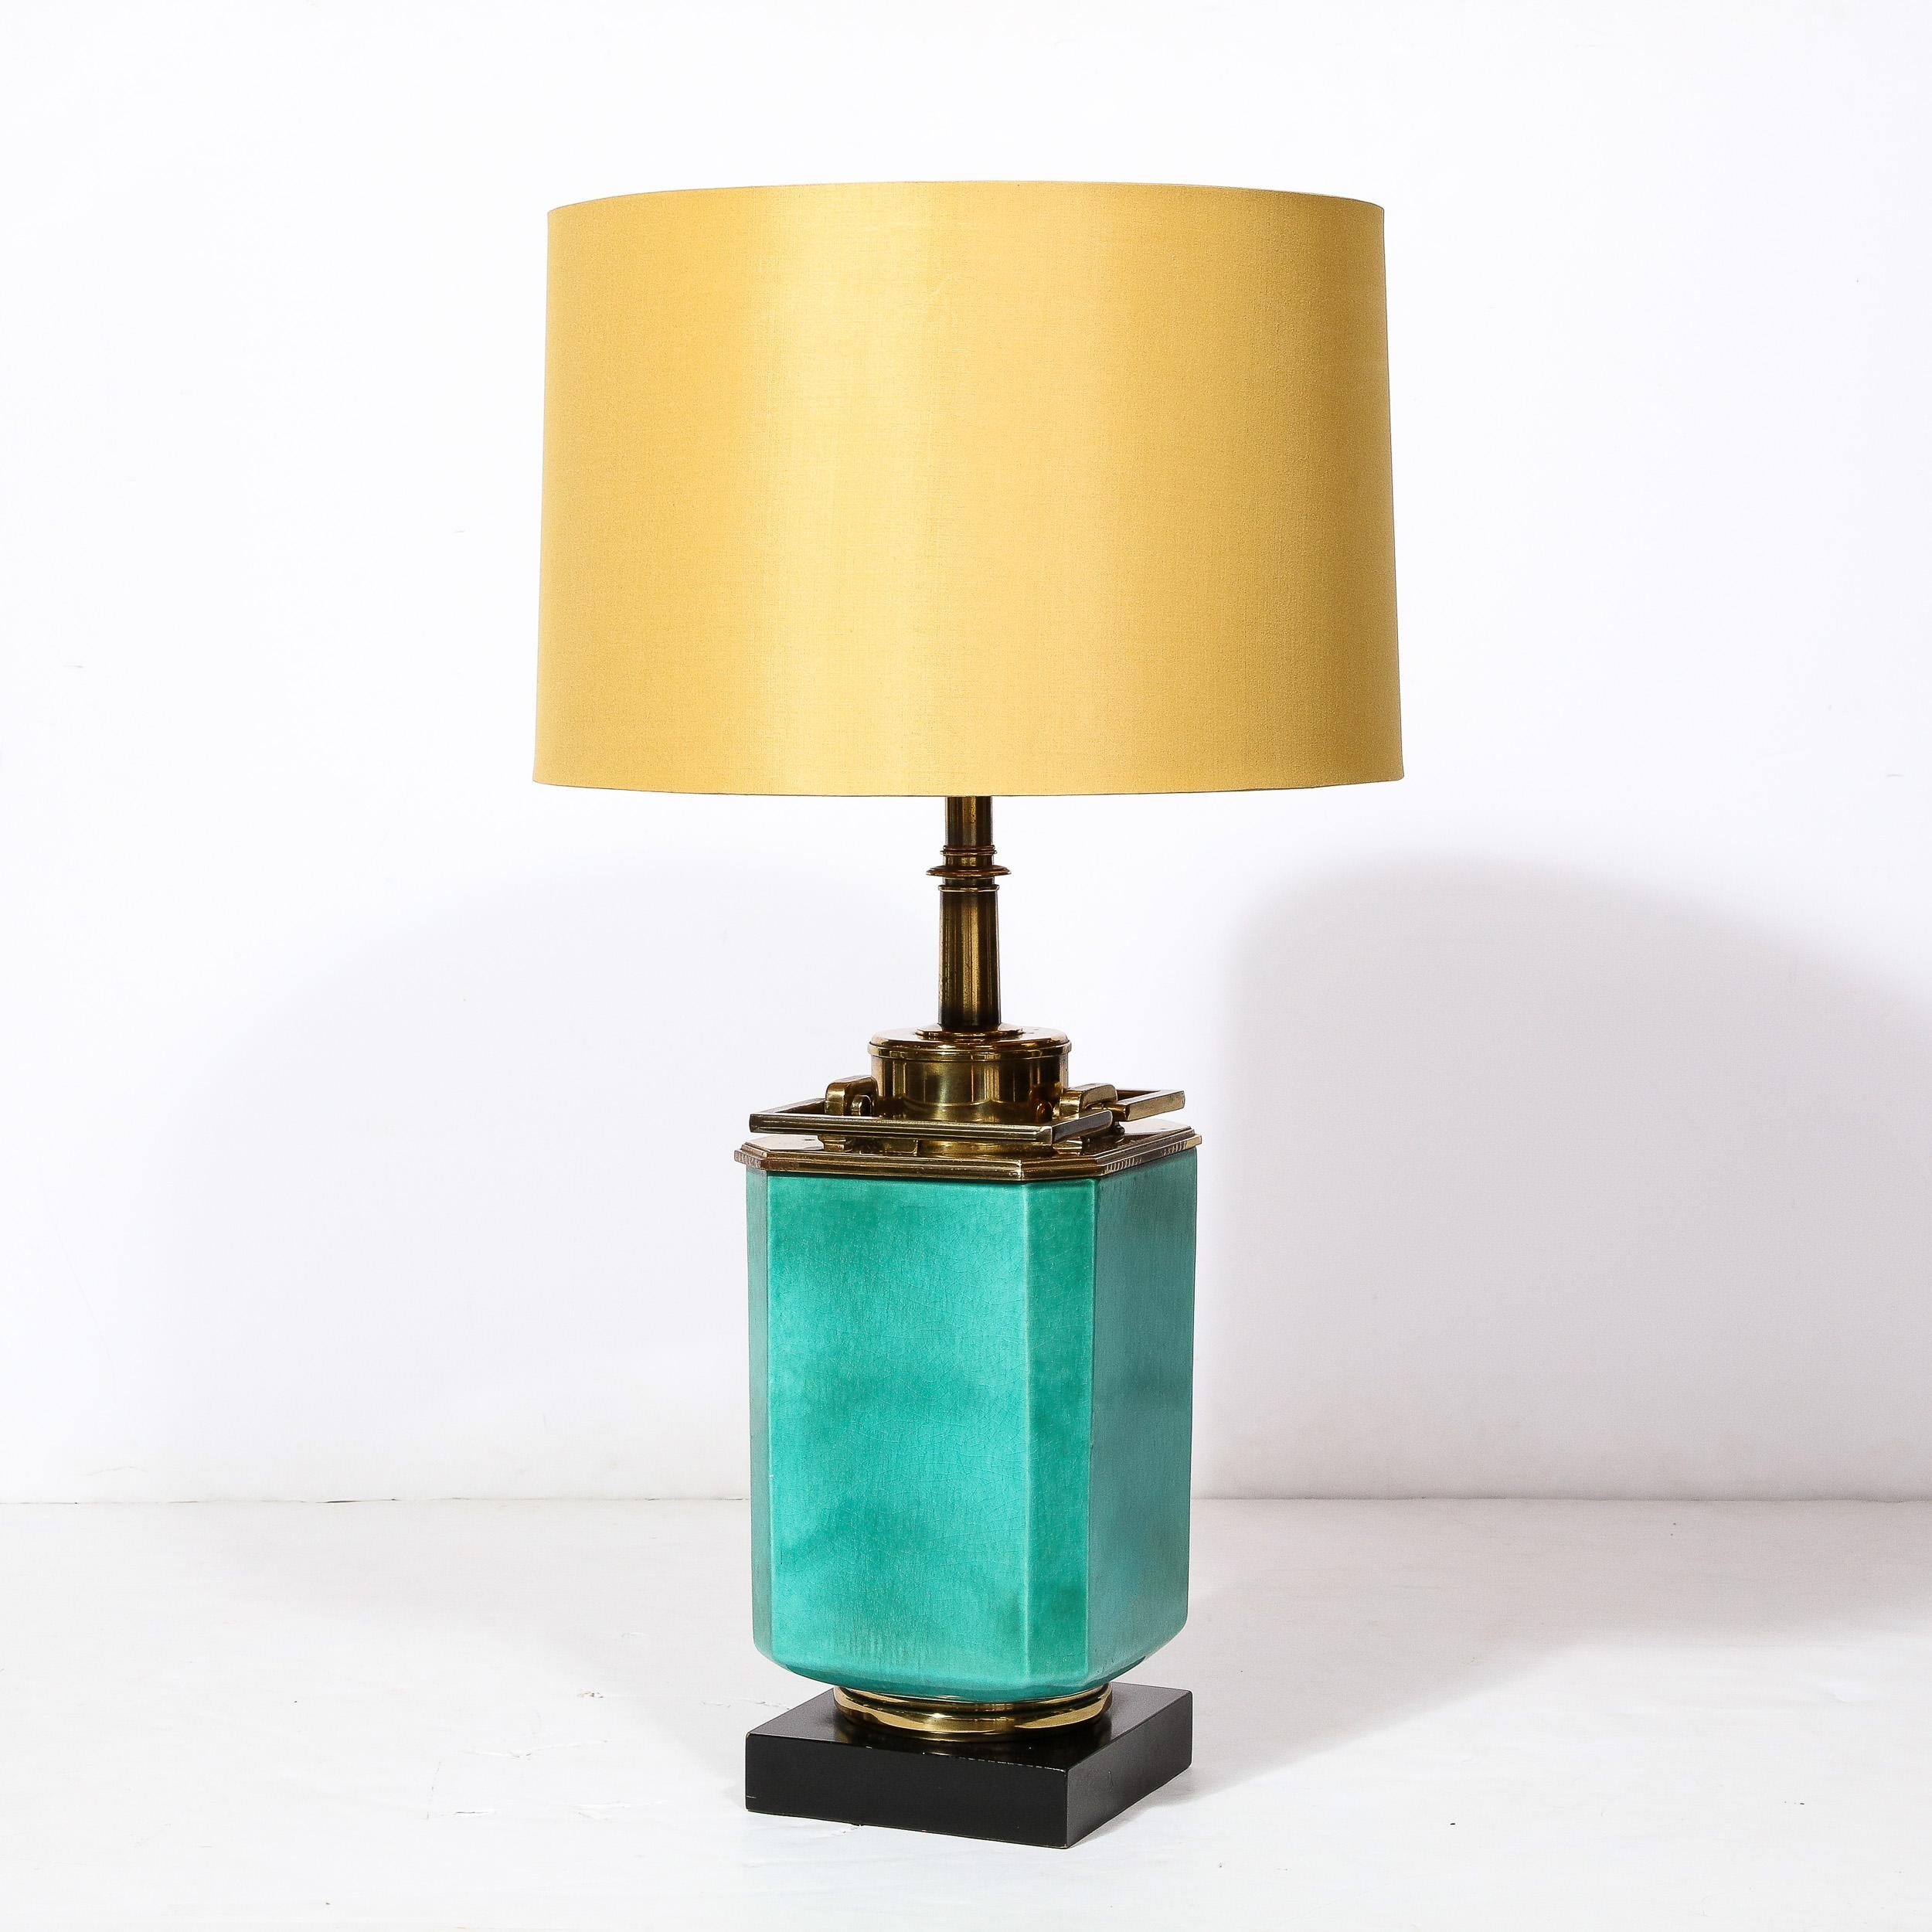 American Mid-Century Modernist Table Lamp in Turquoise Jade w/ Polished Brass Fittings For Sale